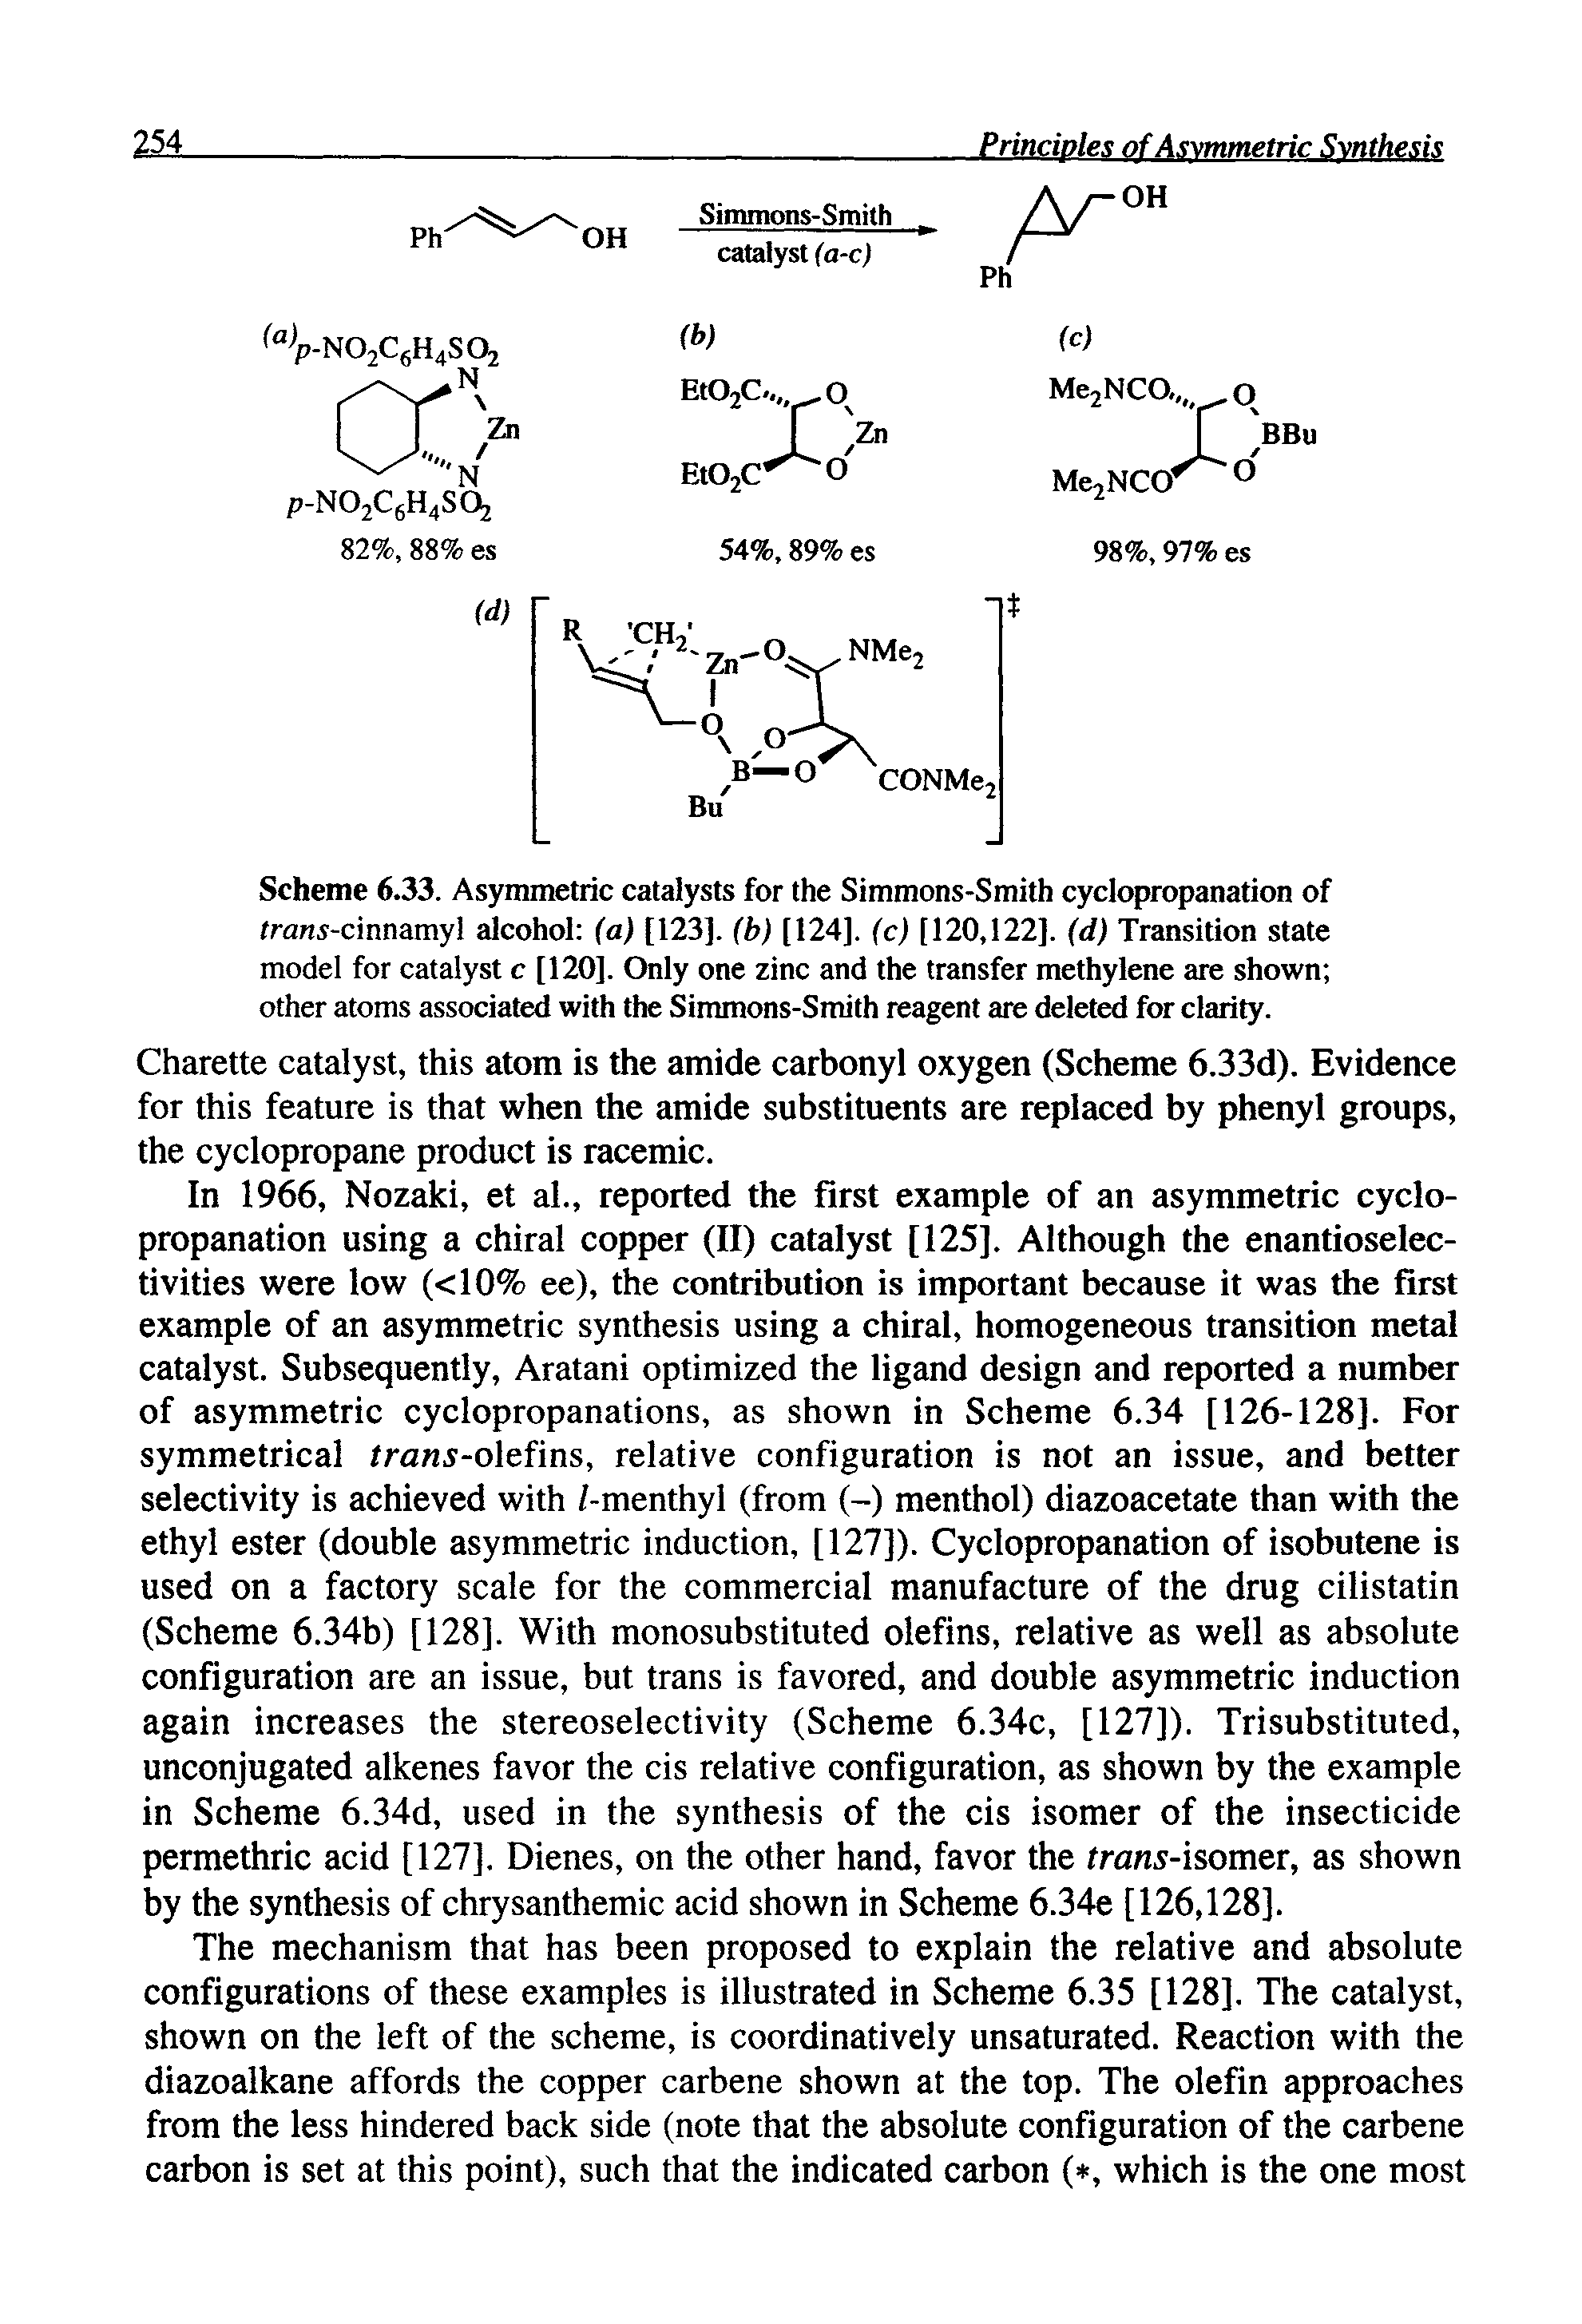 Scheme 6.33. Asymmetric catalysts for the Simmons-Smith cyclopropanation of trani-cinnamyl alcohol (a) [123]. (b) [124]. (c) [120,122]. (d) Transition state model for catalyst c [120]. Only one zinc and the transfer methylene are shown other atoms associated with the Simmons-Smith reagent are deleted for clarity.